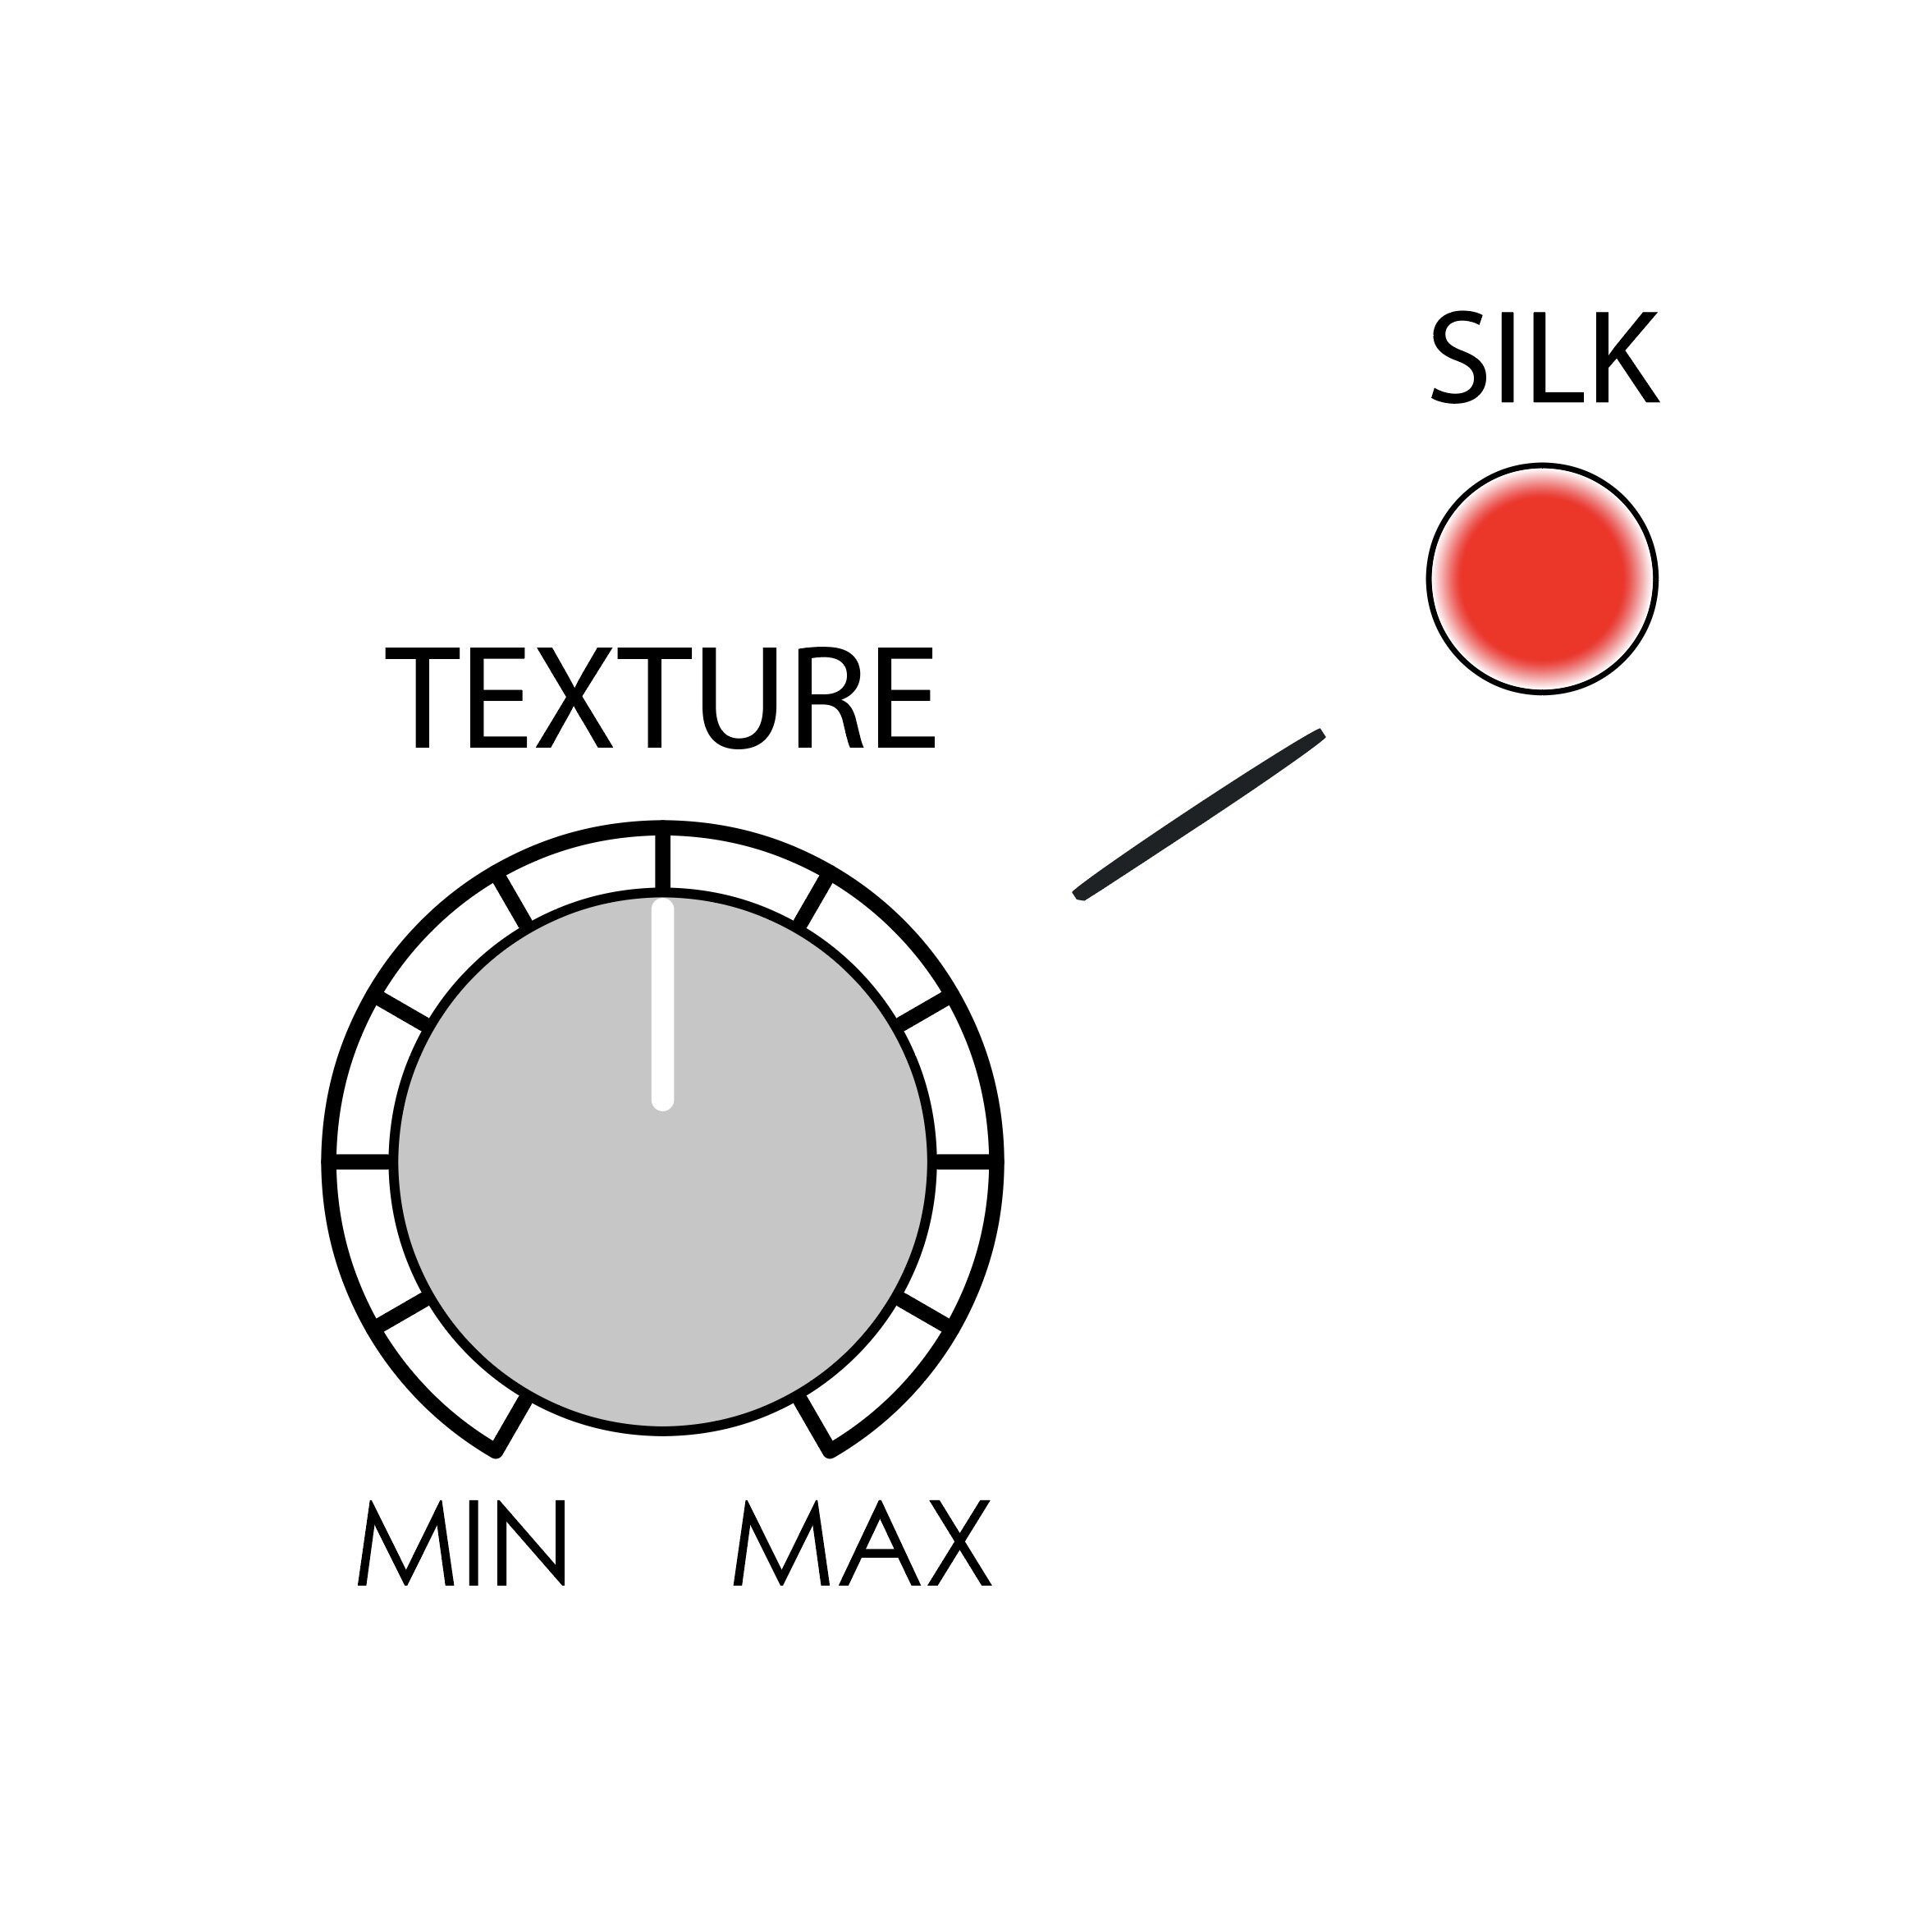 What is Silk?